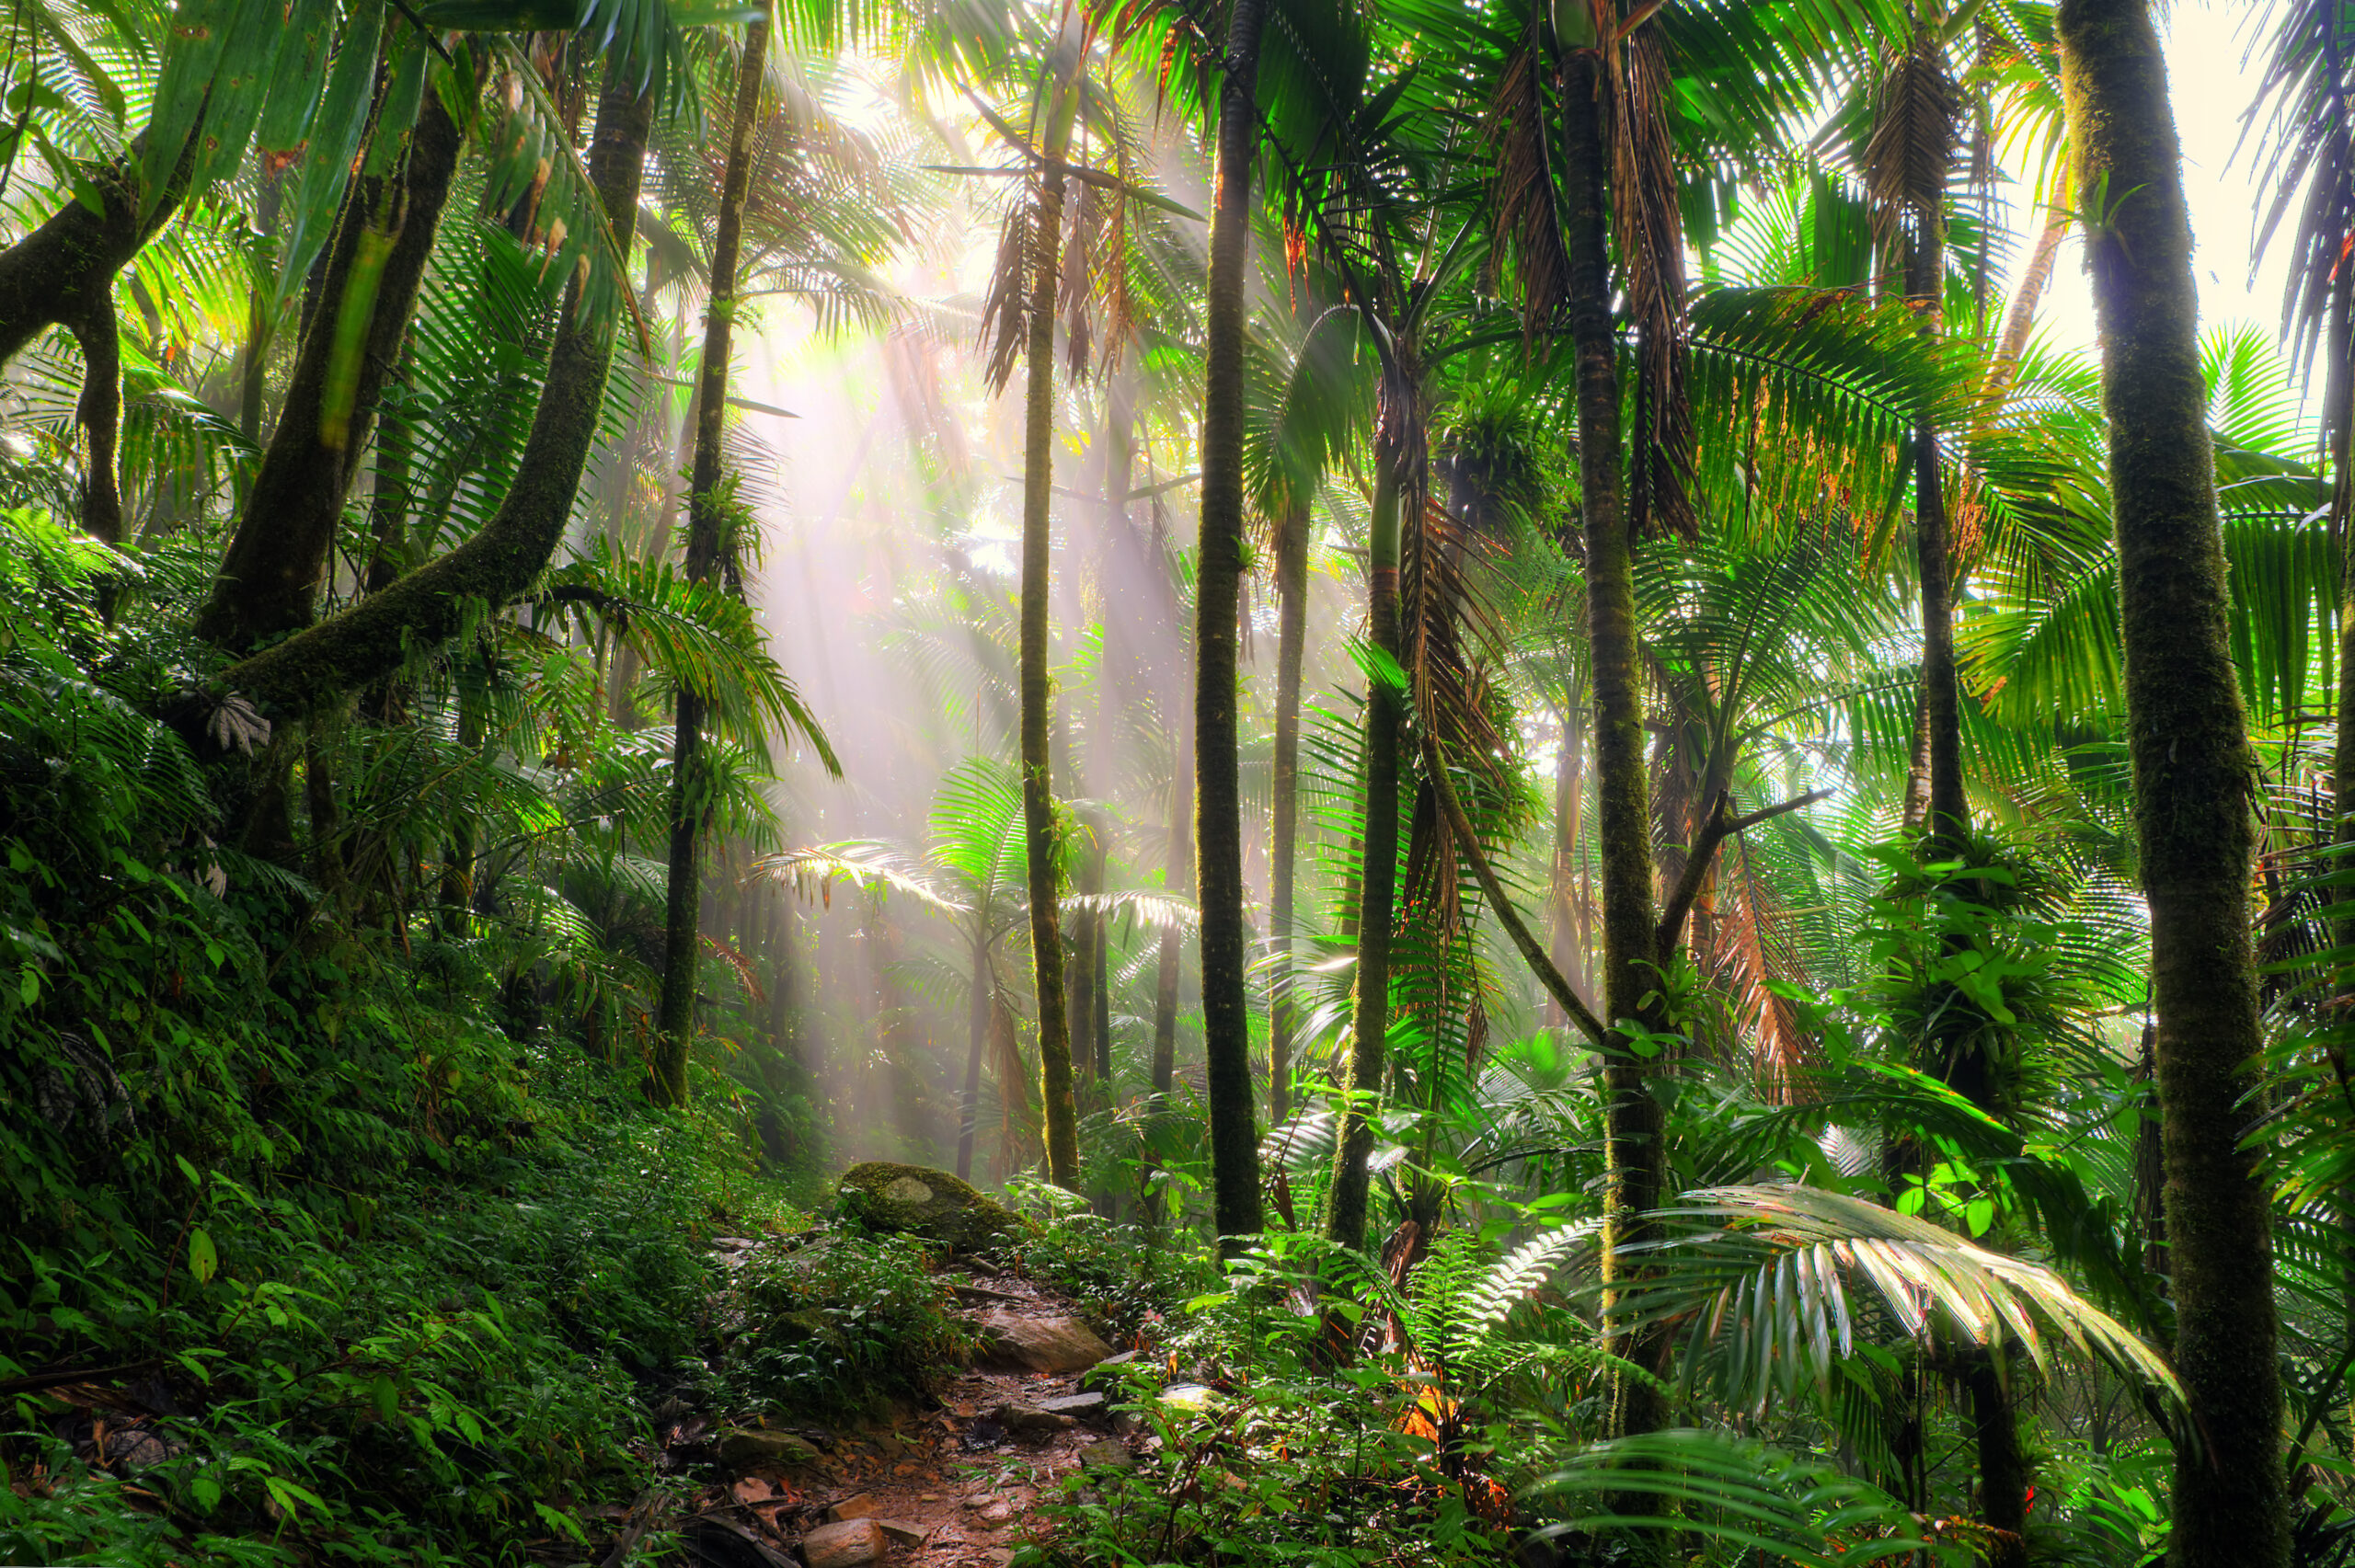 The path to corporate net zero must deliver what the planet needs, and that includes protecting tropical forests